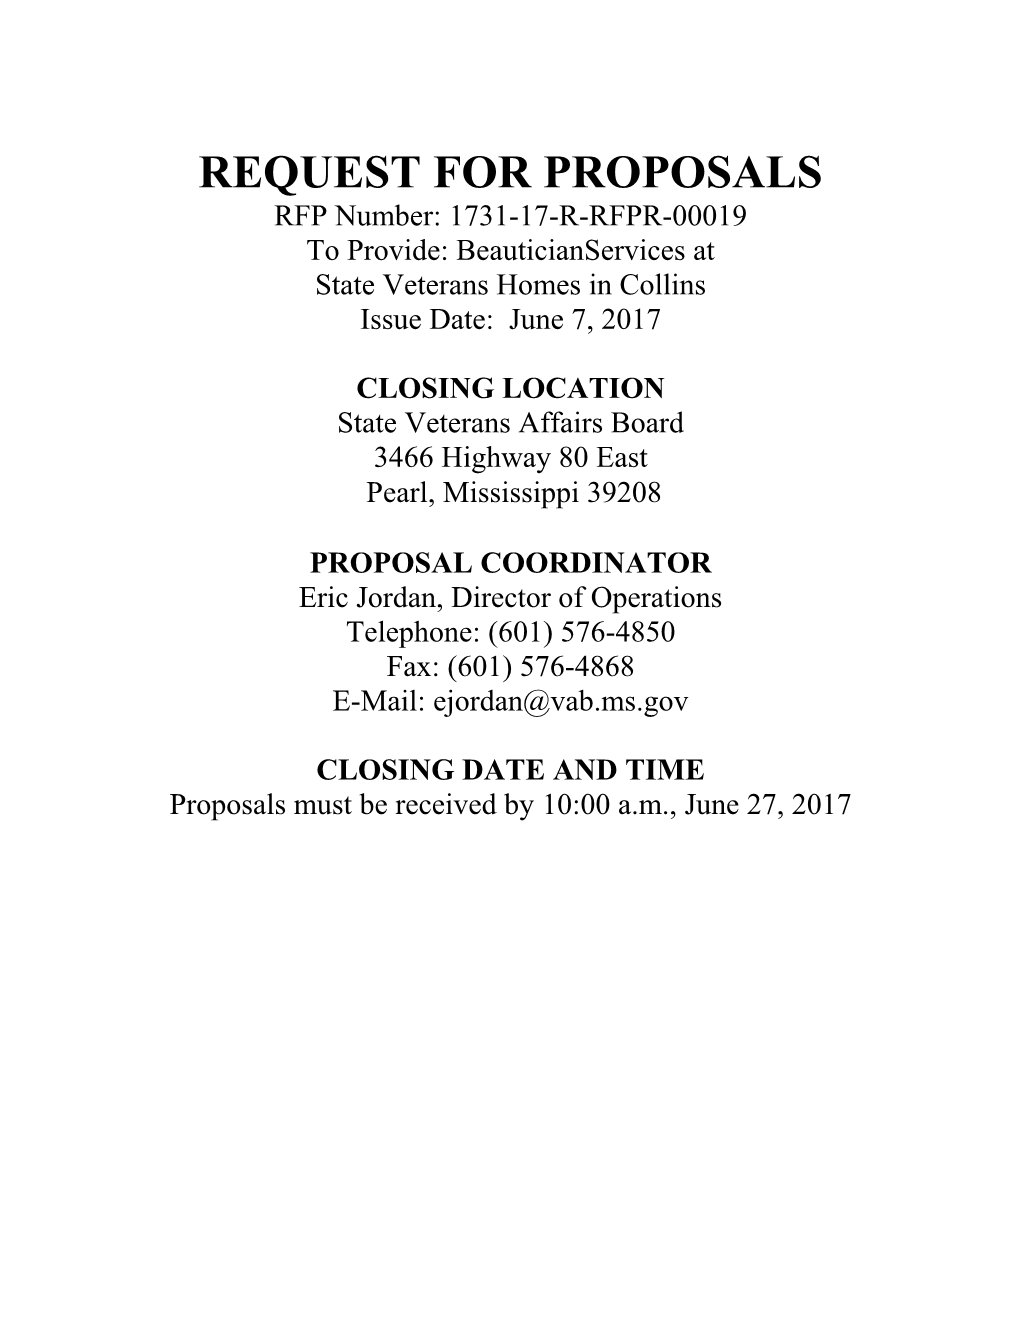 Request for Proposals s29